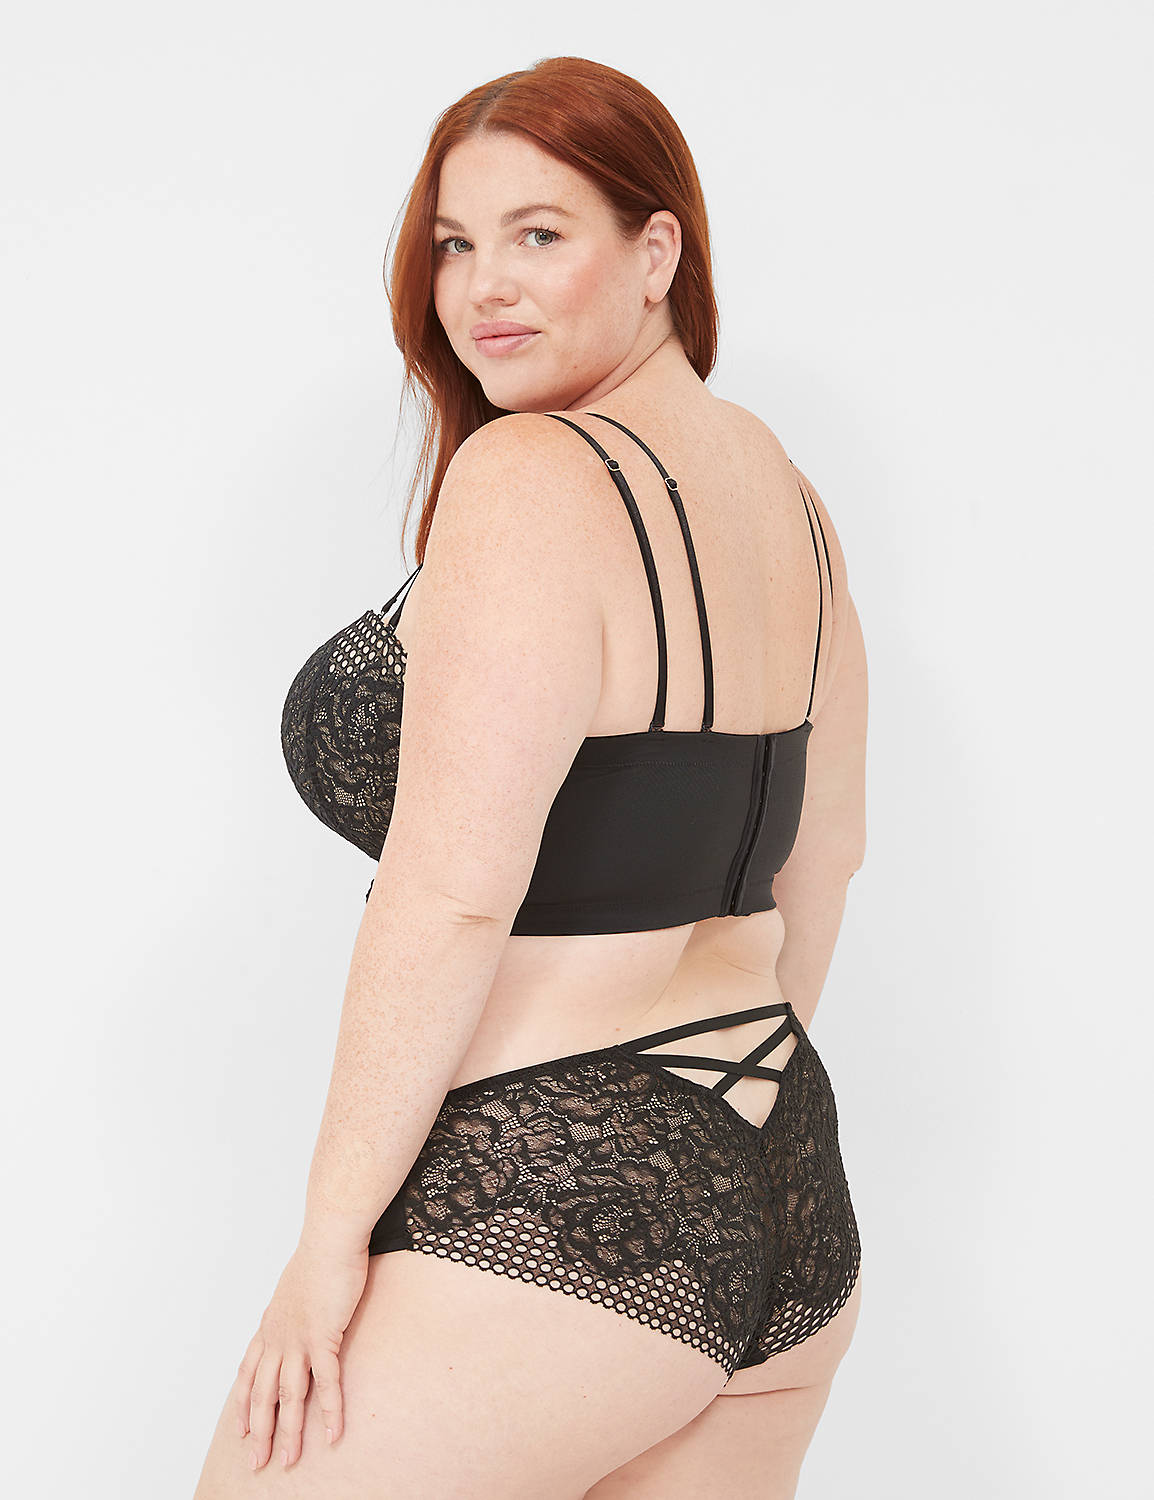 Lace Galloon Lace Back Cheeky 11407 Product Image 2